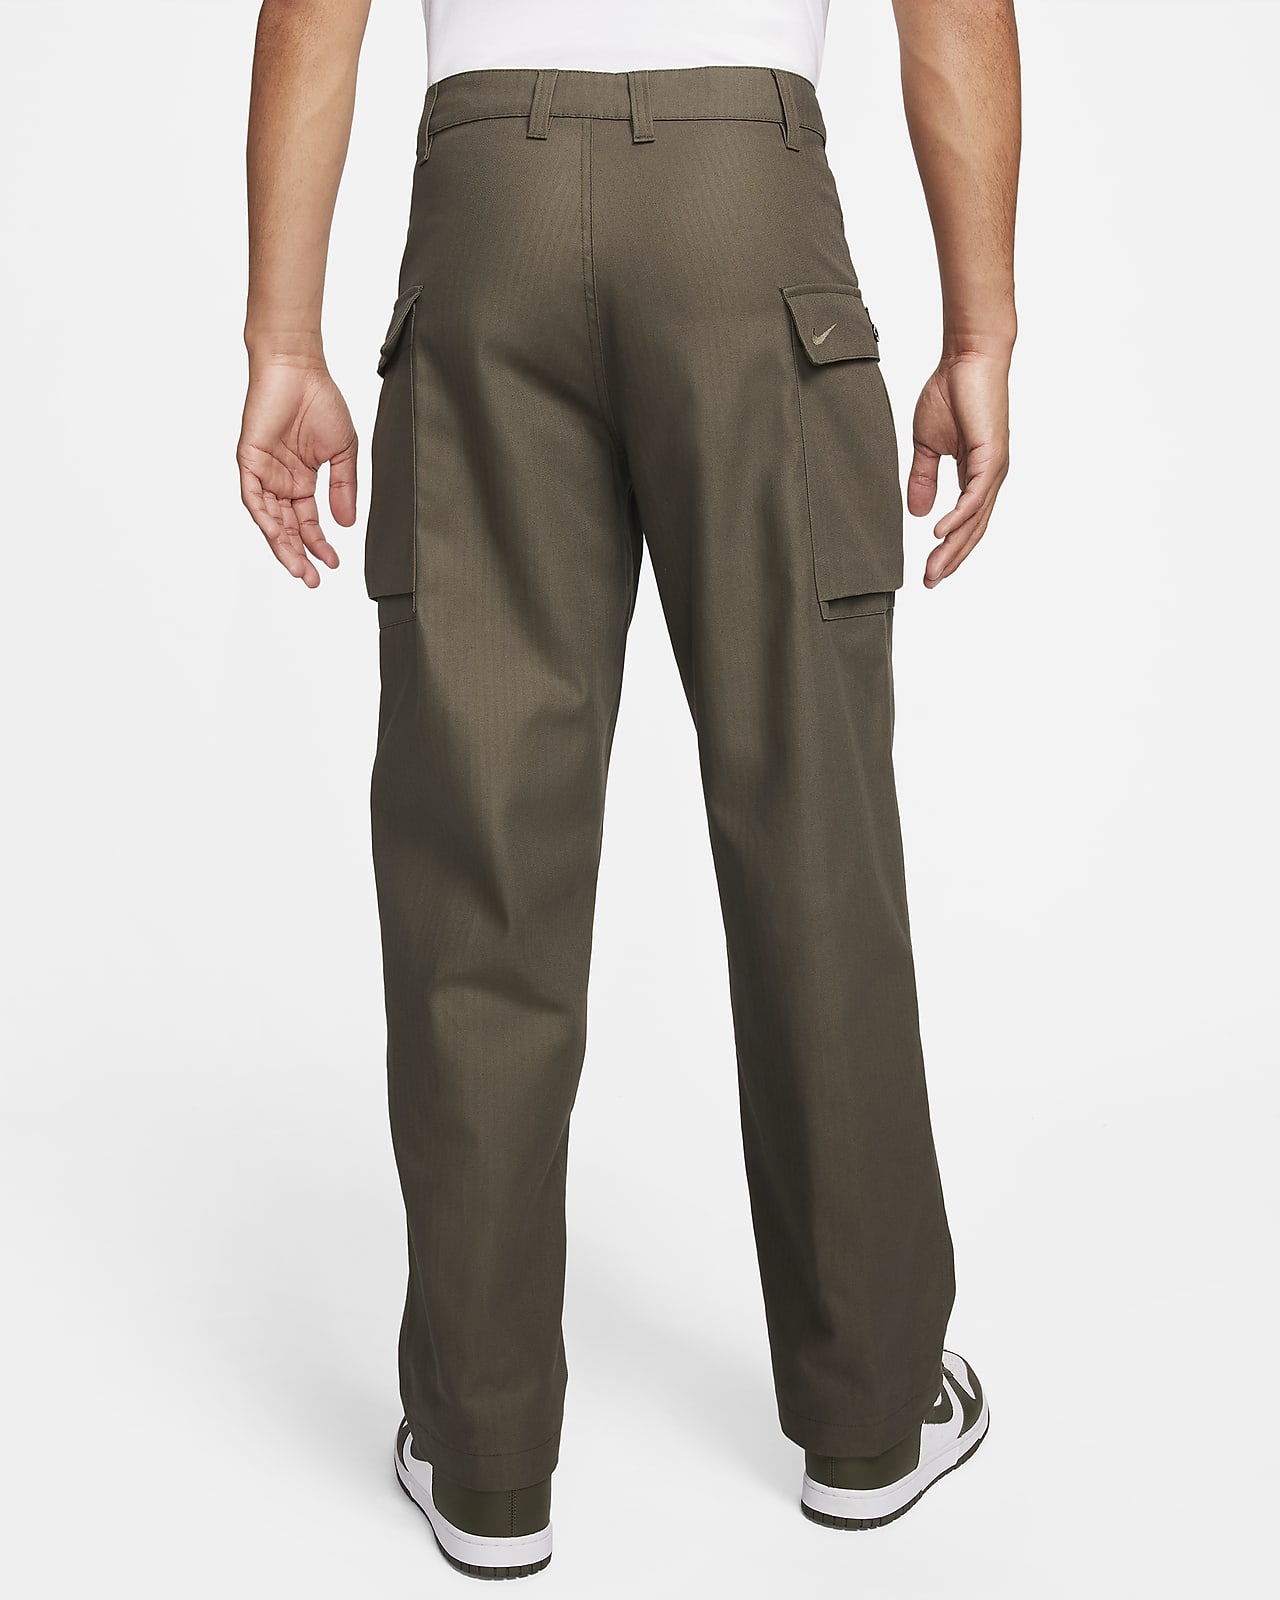 Police Kiraly Beige Mens Cargo Pants | 883 Police